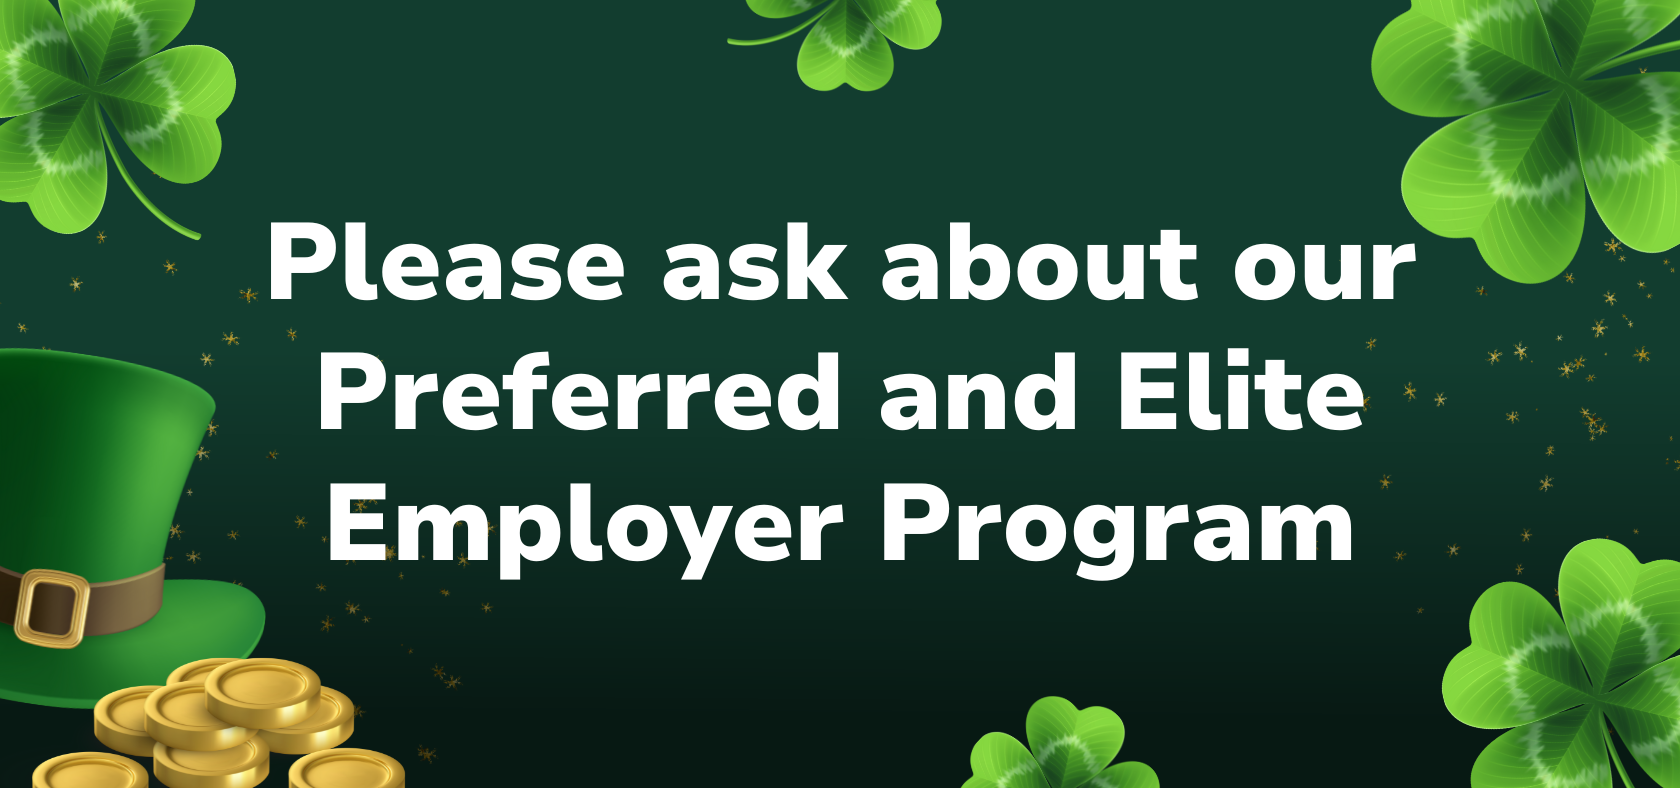 Preferred and Elite Employee Program Contact the office for details!